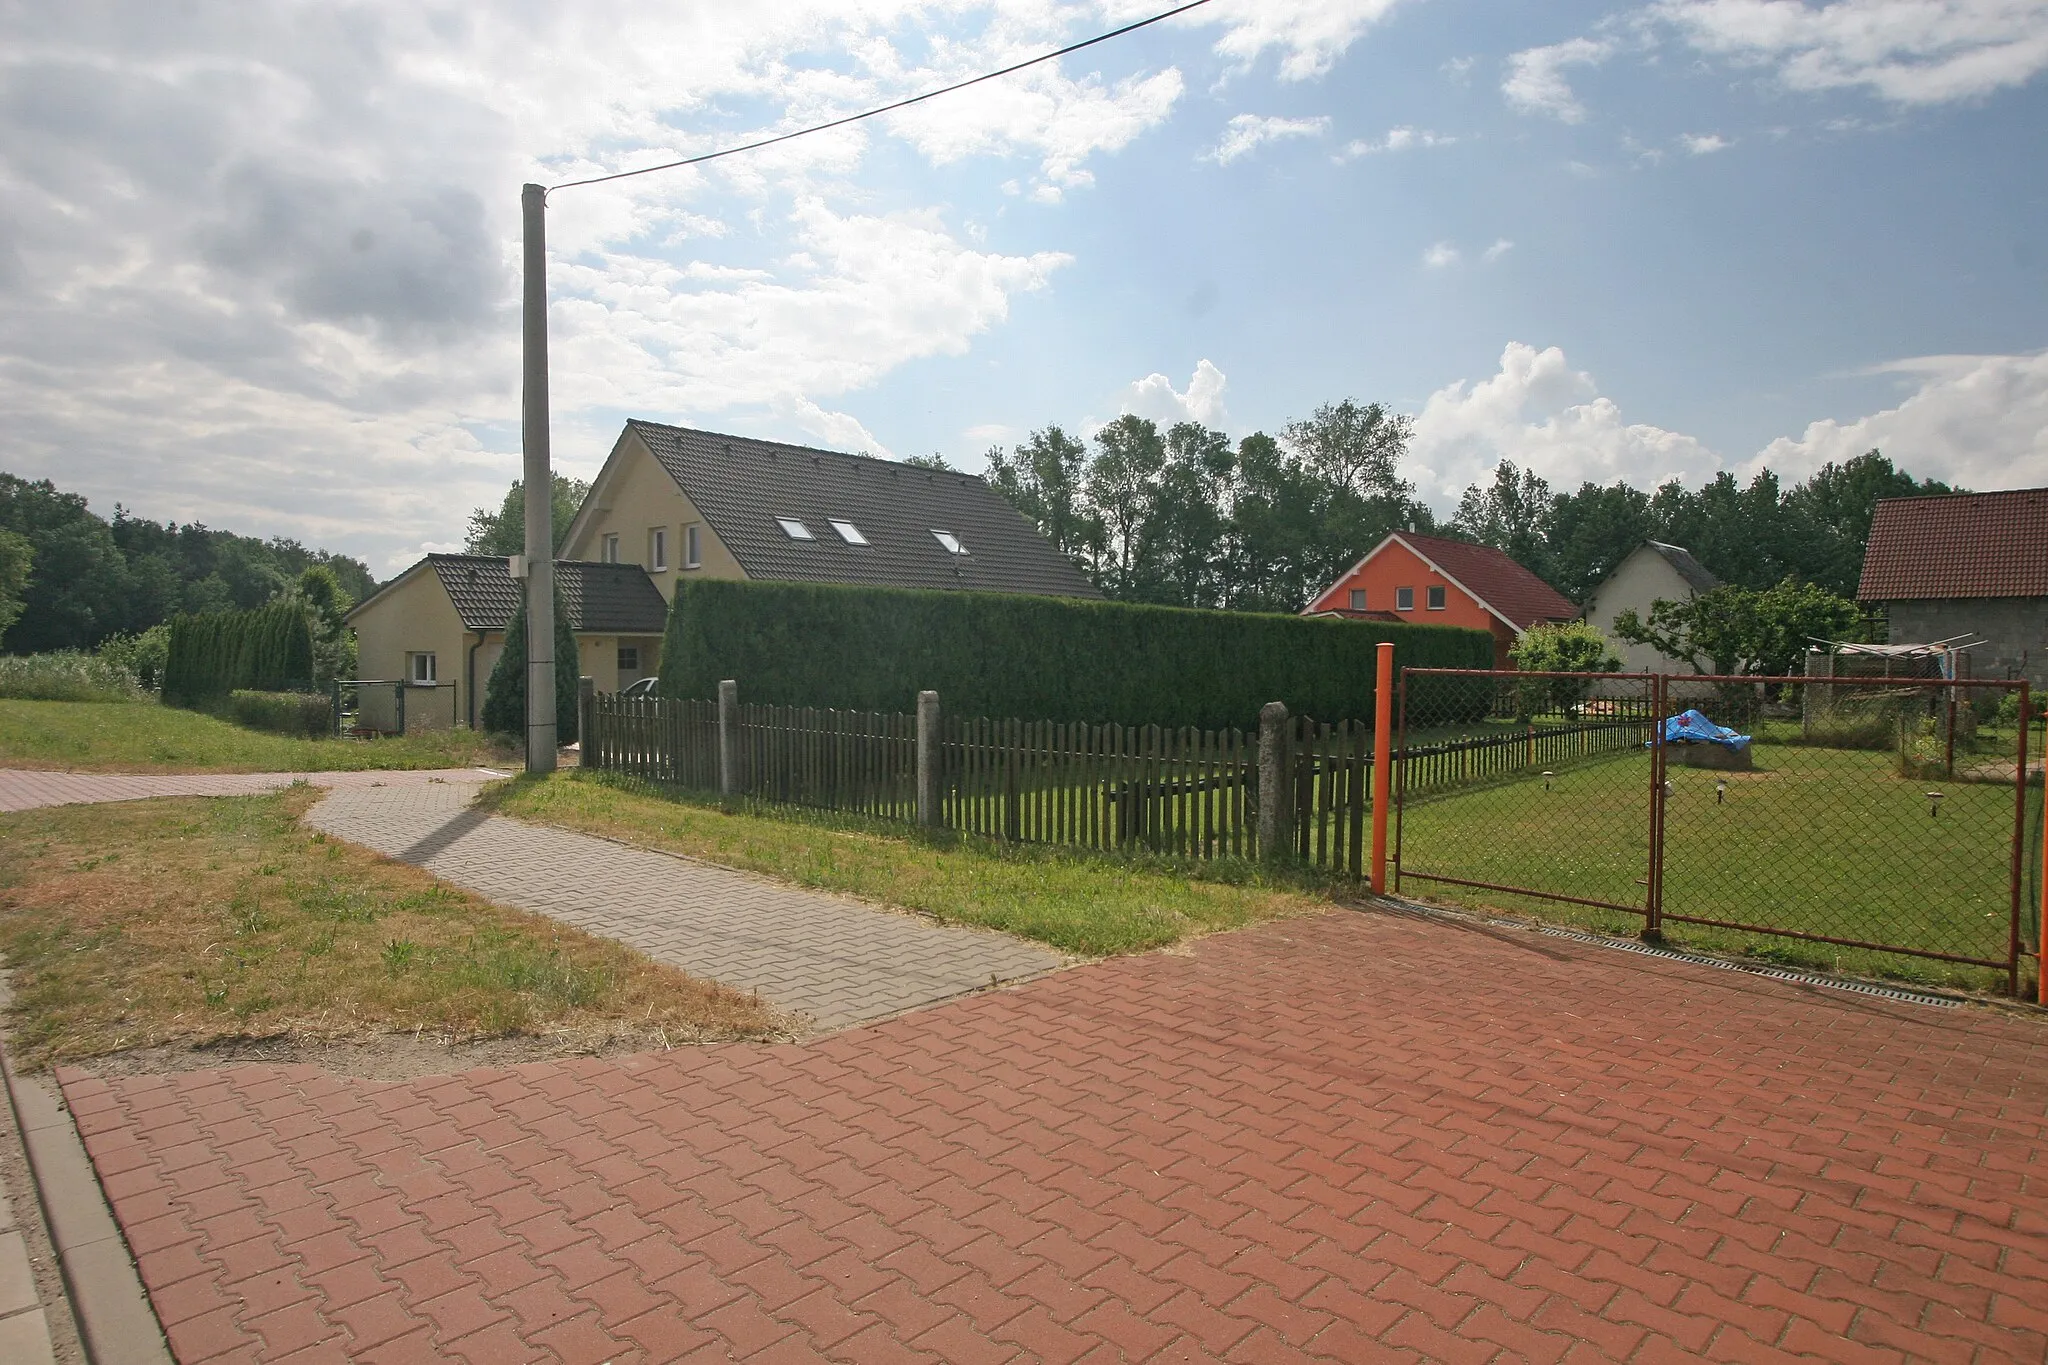 Photo showing: Pohránov čp. 29
Camera location 50° 04′ 43.77″ N, 15° 44′ 17.4″ E View this and other nearby images on: OpenStreetMap 50.078825;   15.738167

This file was created as a part of the photographic program of Wikimedia Czech Republic. Project: Foto českých obcí The program supports Wikimedia Commons photographers in the Czech Republic.